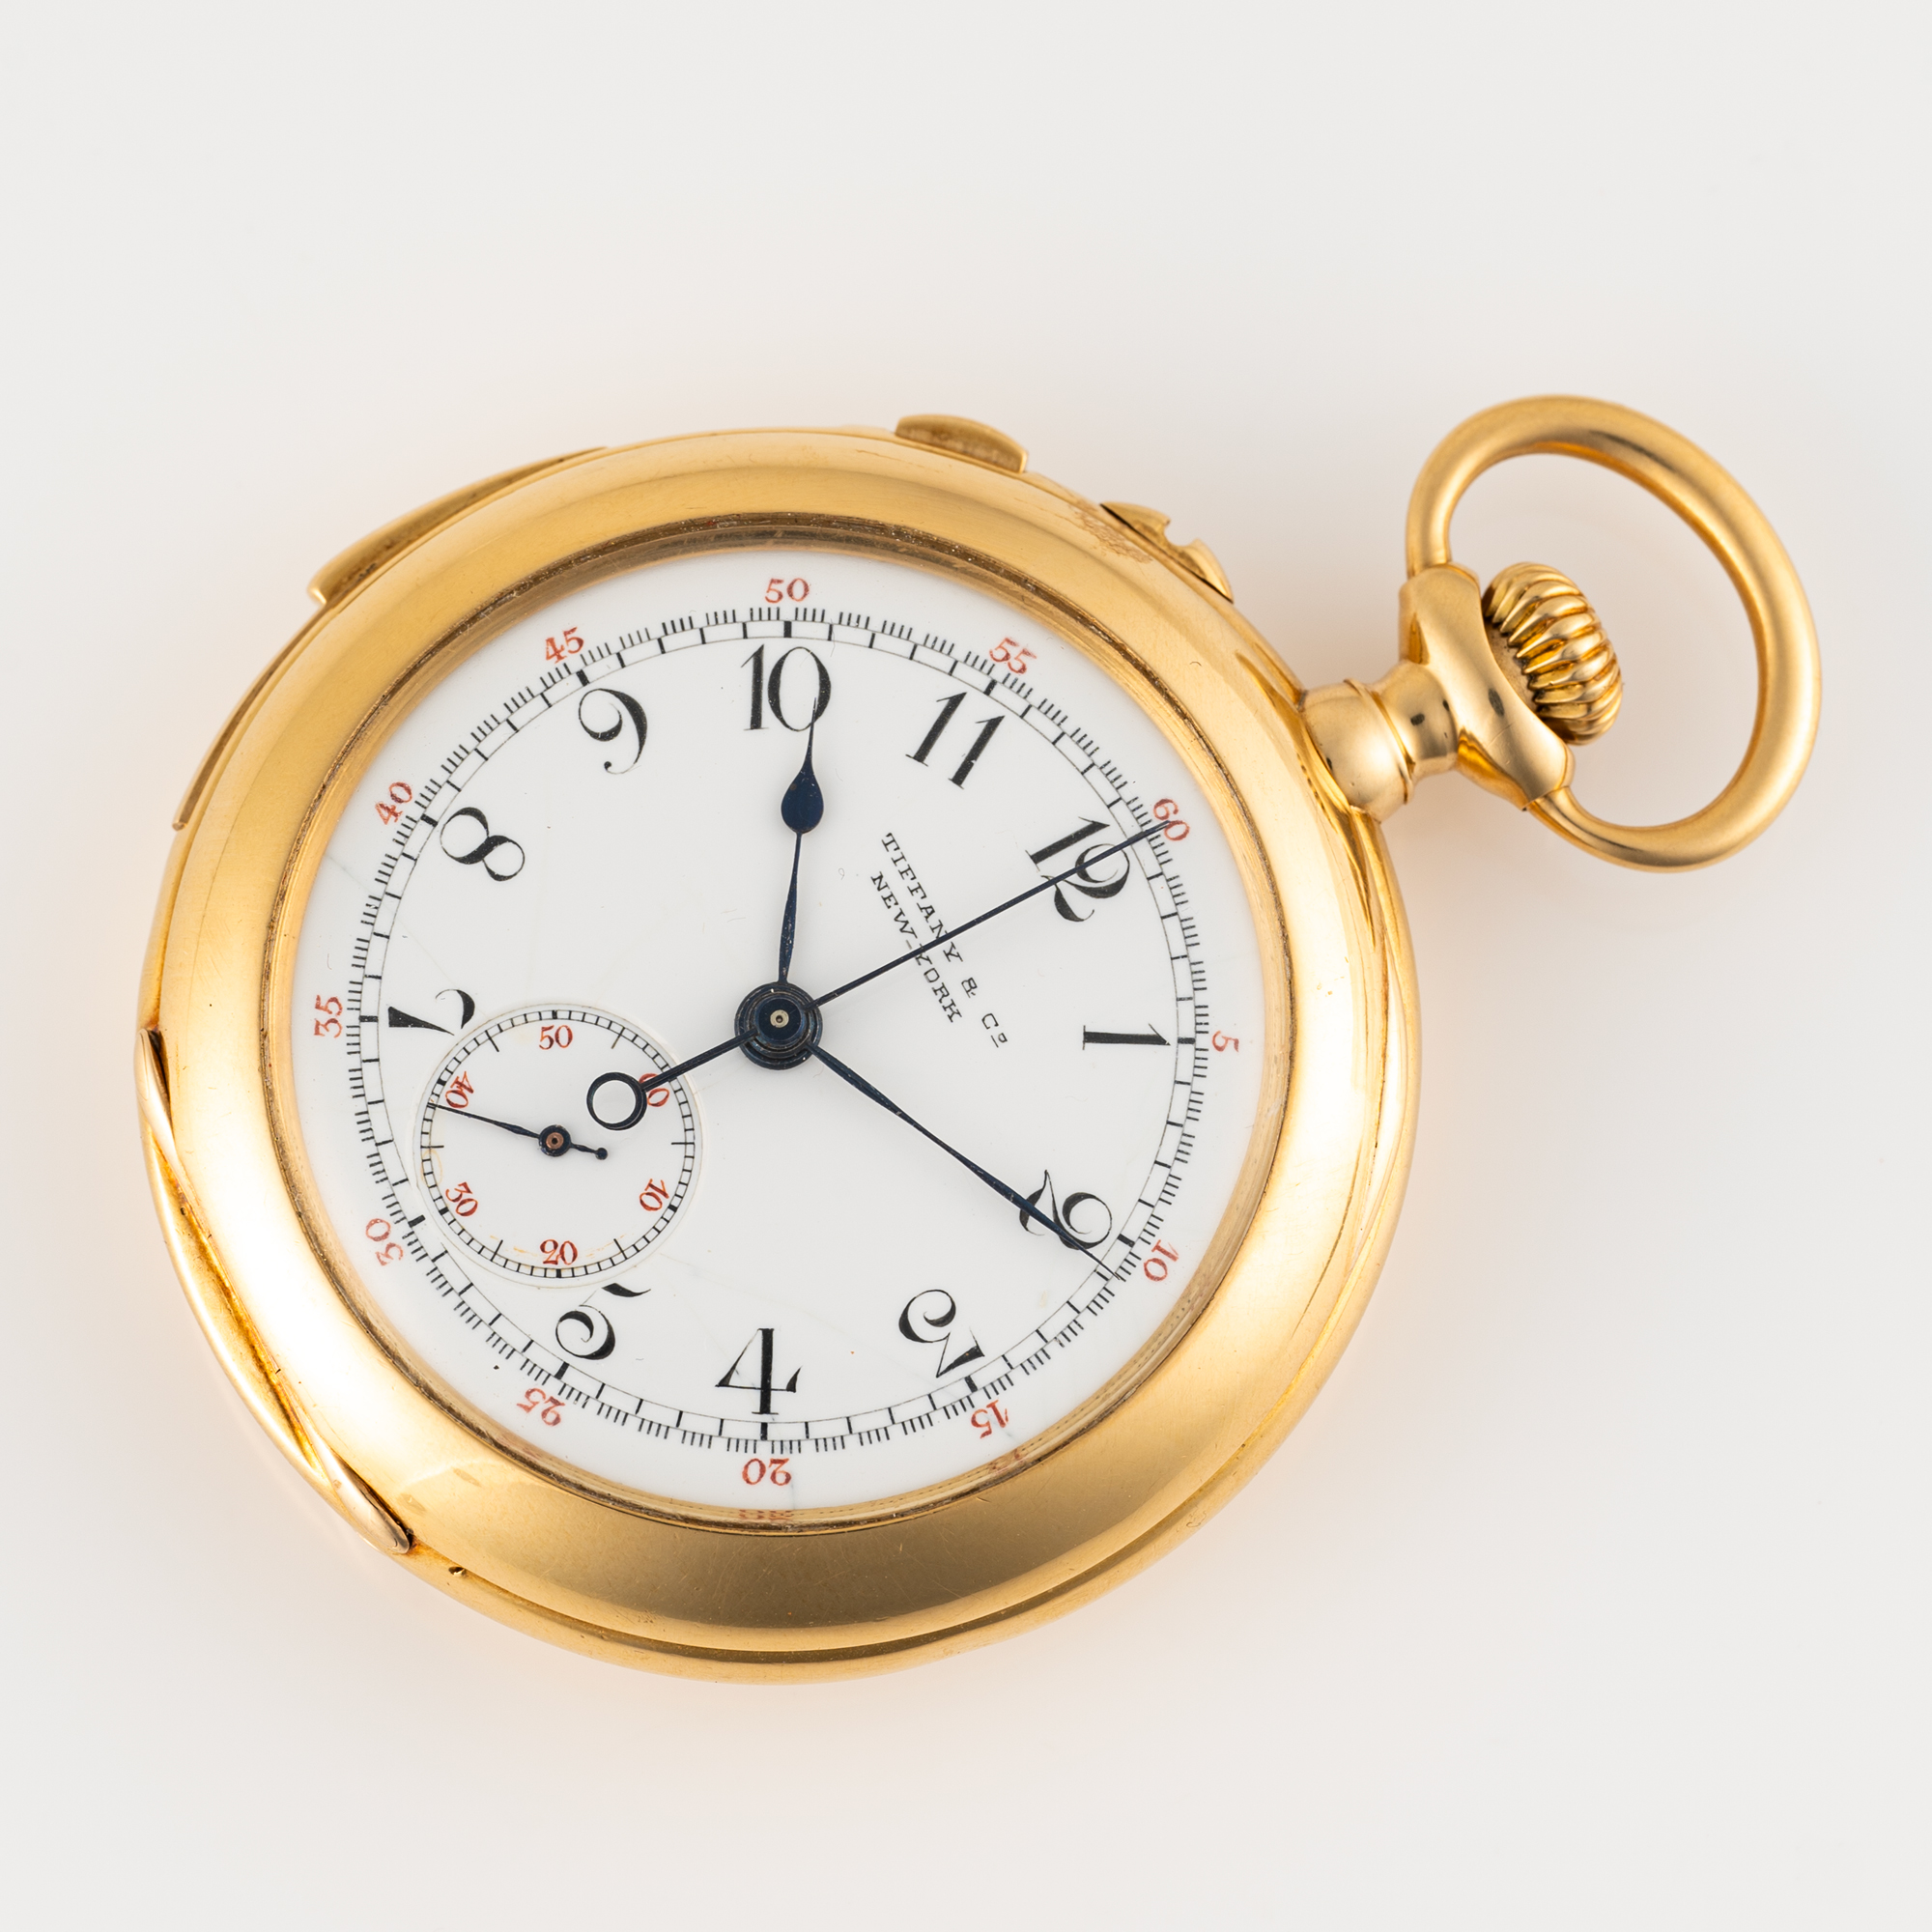 A FINE & RARE GENTLEMAN'S SIZE 18K SOLID GOLD OPEN FACE PATEK PHILIPPE FIVE MINUTE REPEATER SPLIT - Image 3 of 11